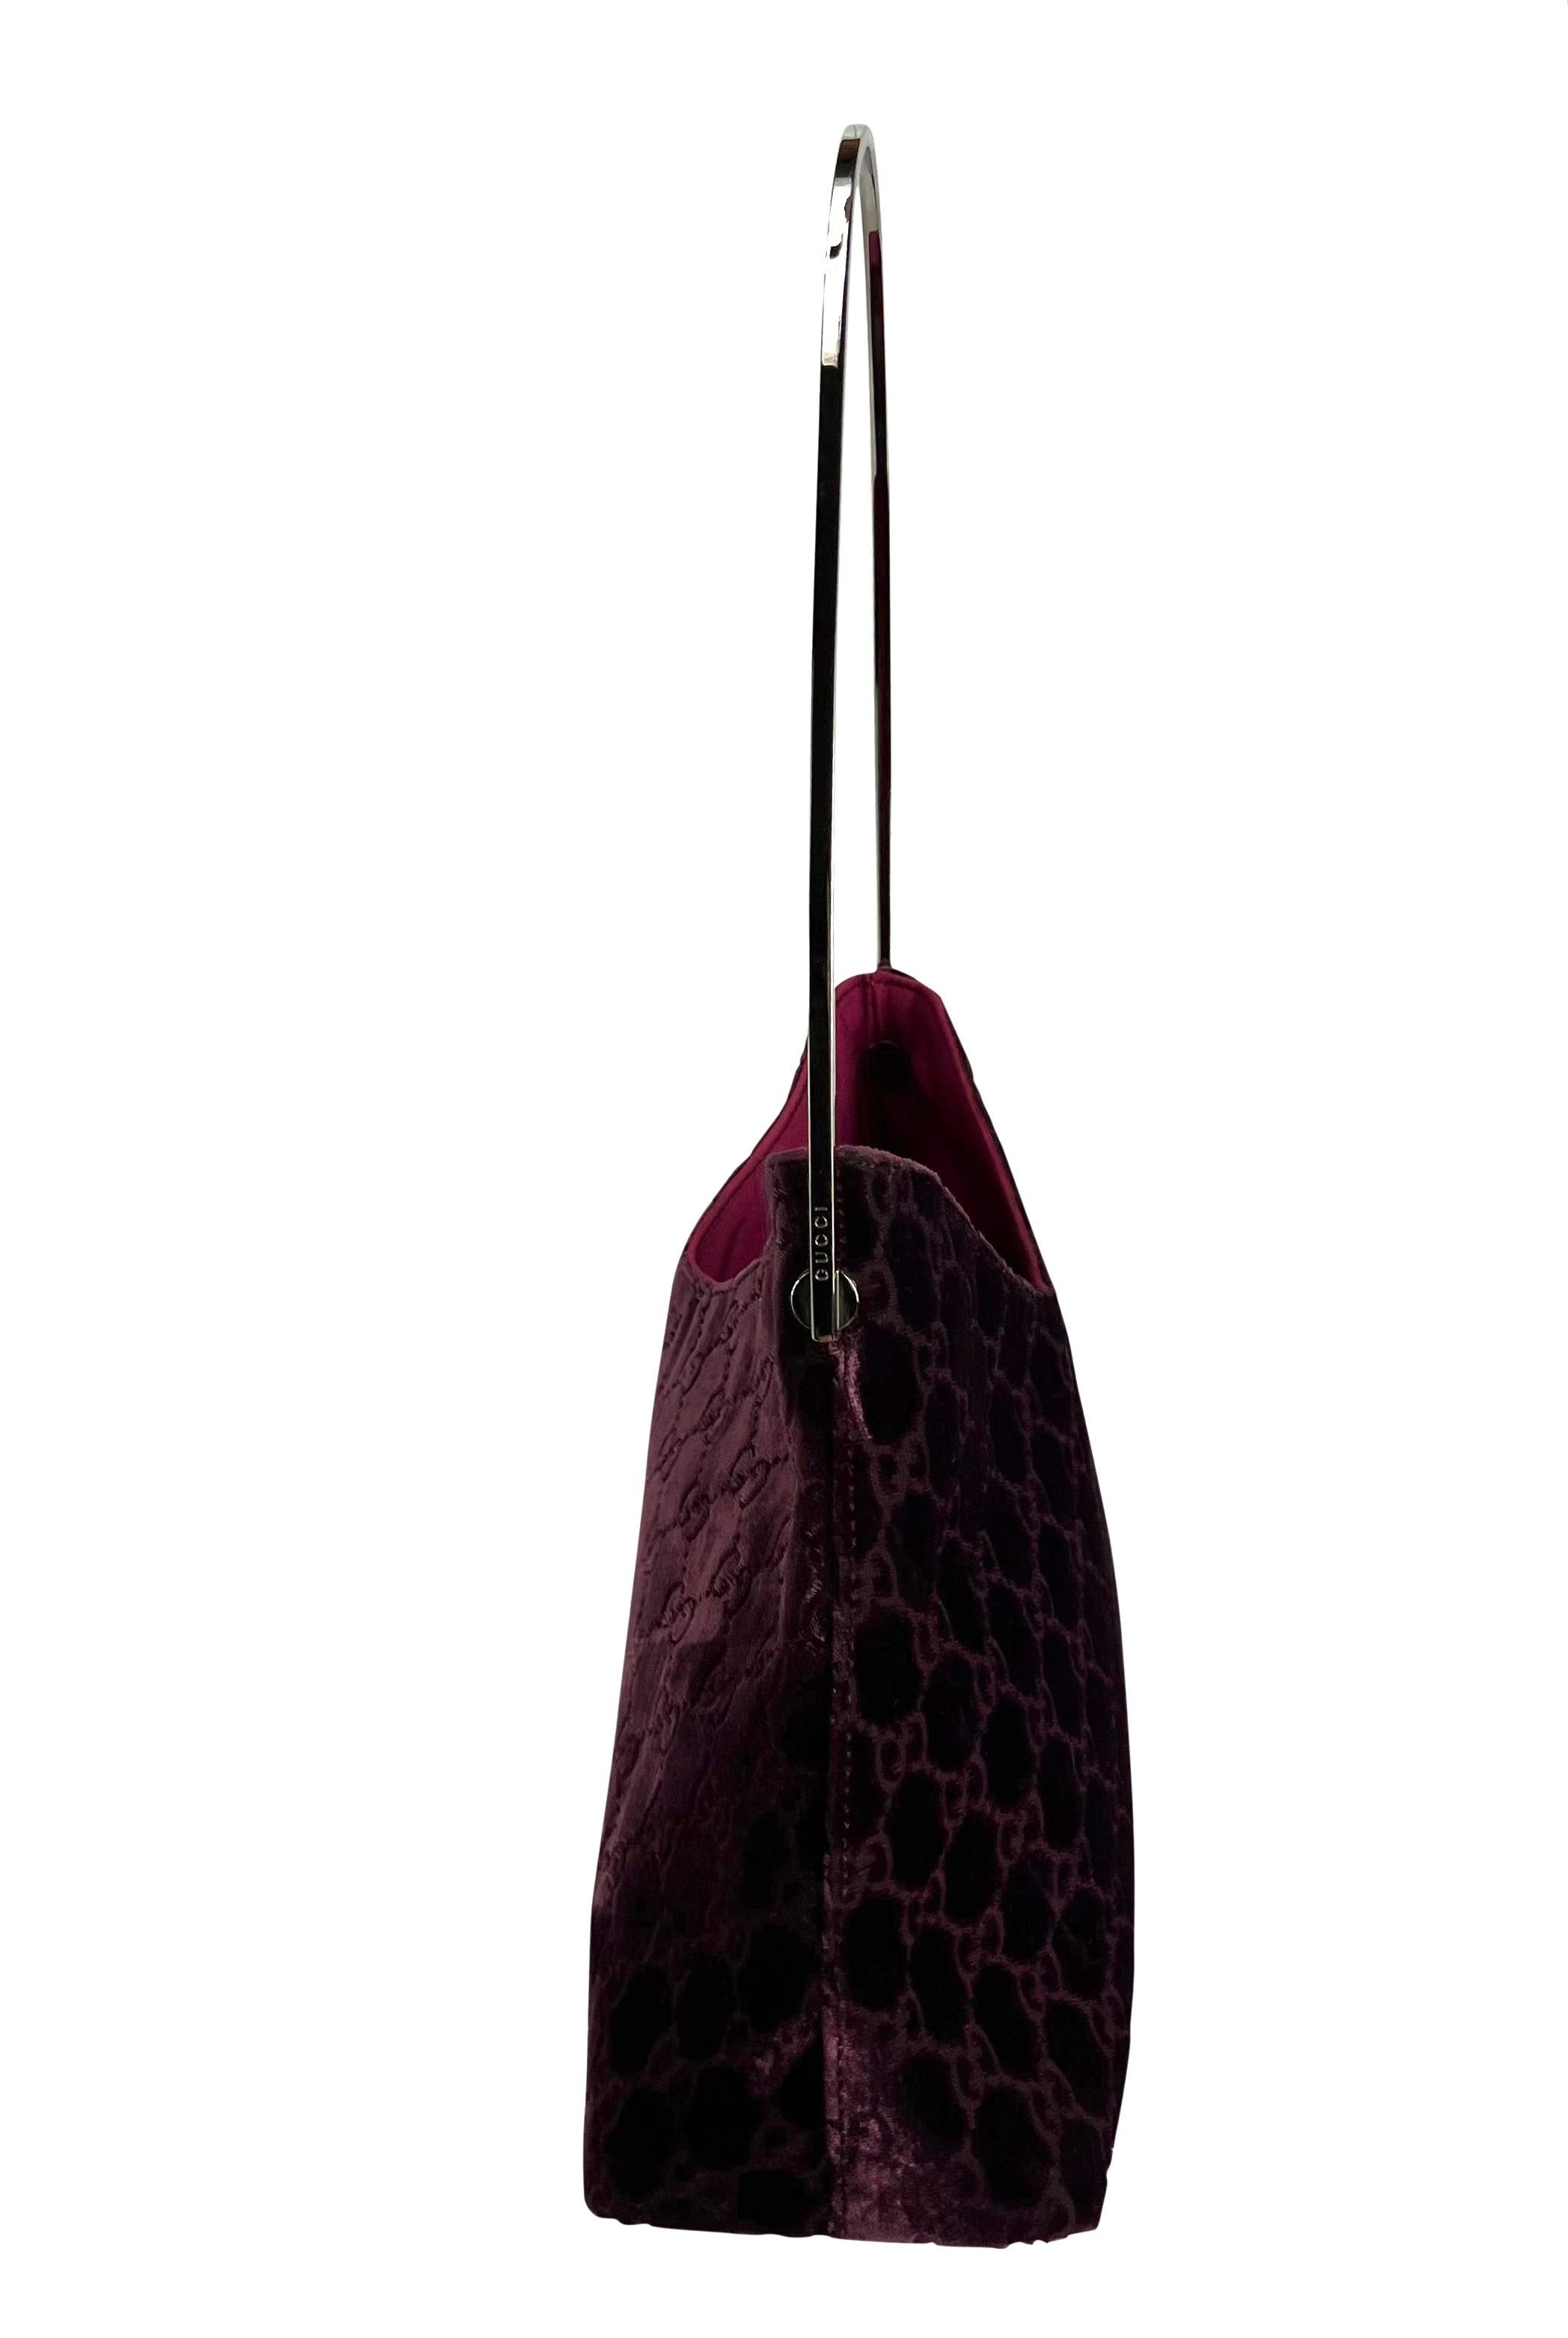 Presenting an iconic burgundy Gucci 'GG' monogram bucket bag designed by Tom Ford. From the Fall/Winter 1997 collection, this fabulous bag is constructed of a deep purple/burgundy silk velvet body and is complete with a silver plated handle. The bag